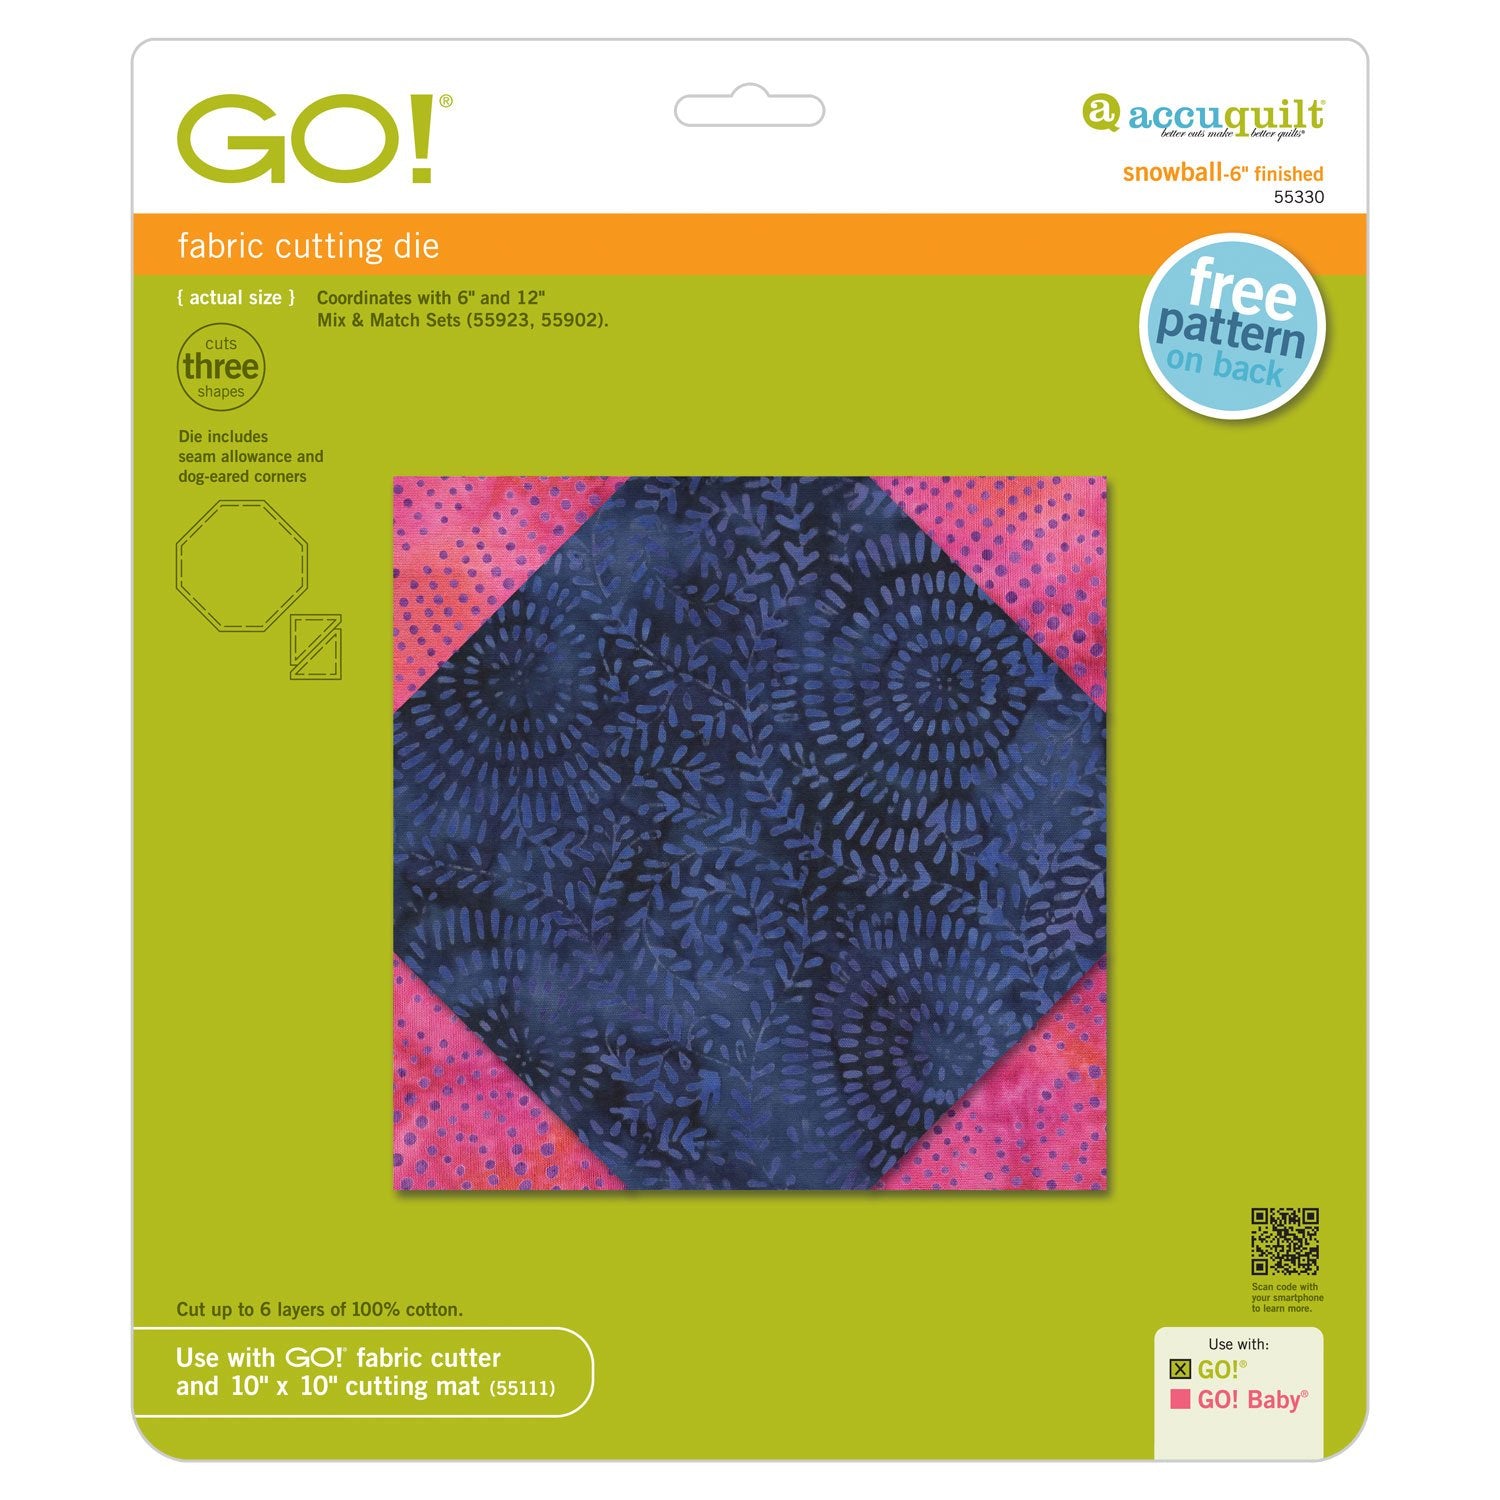  AccuQuilt GO! Baby Fabric Cutting Dies; Stems & Leaves